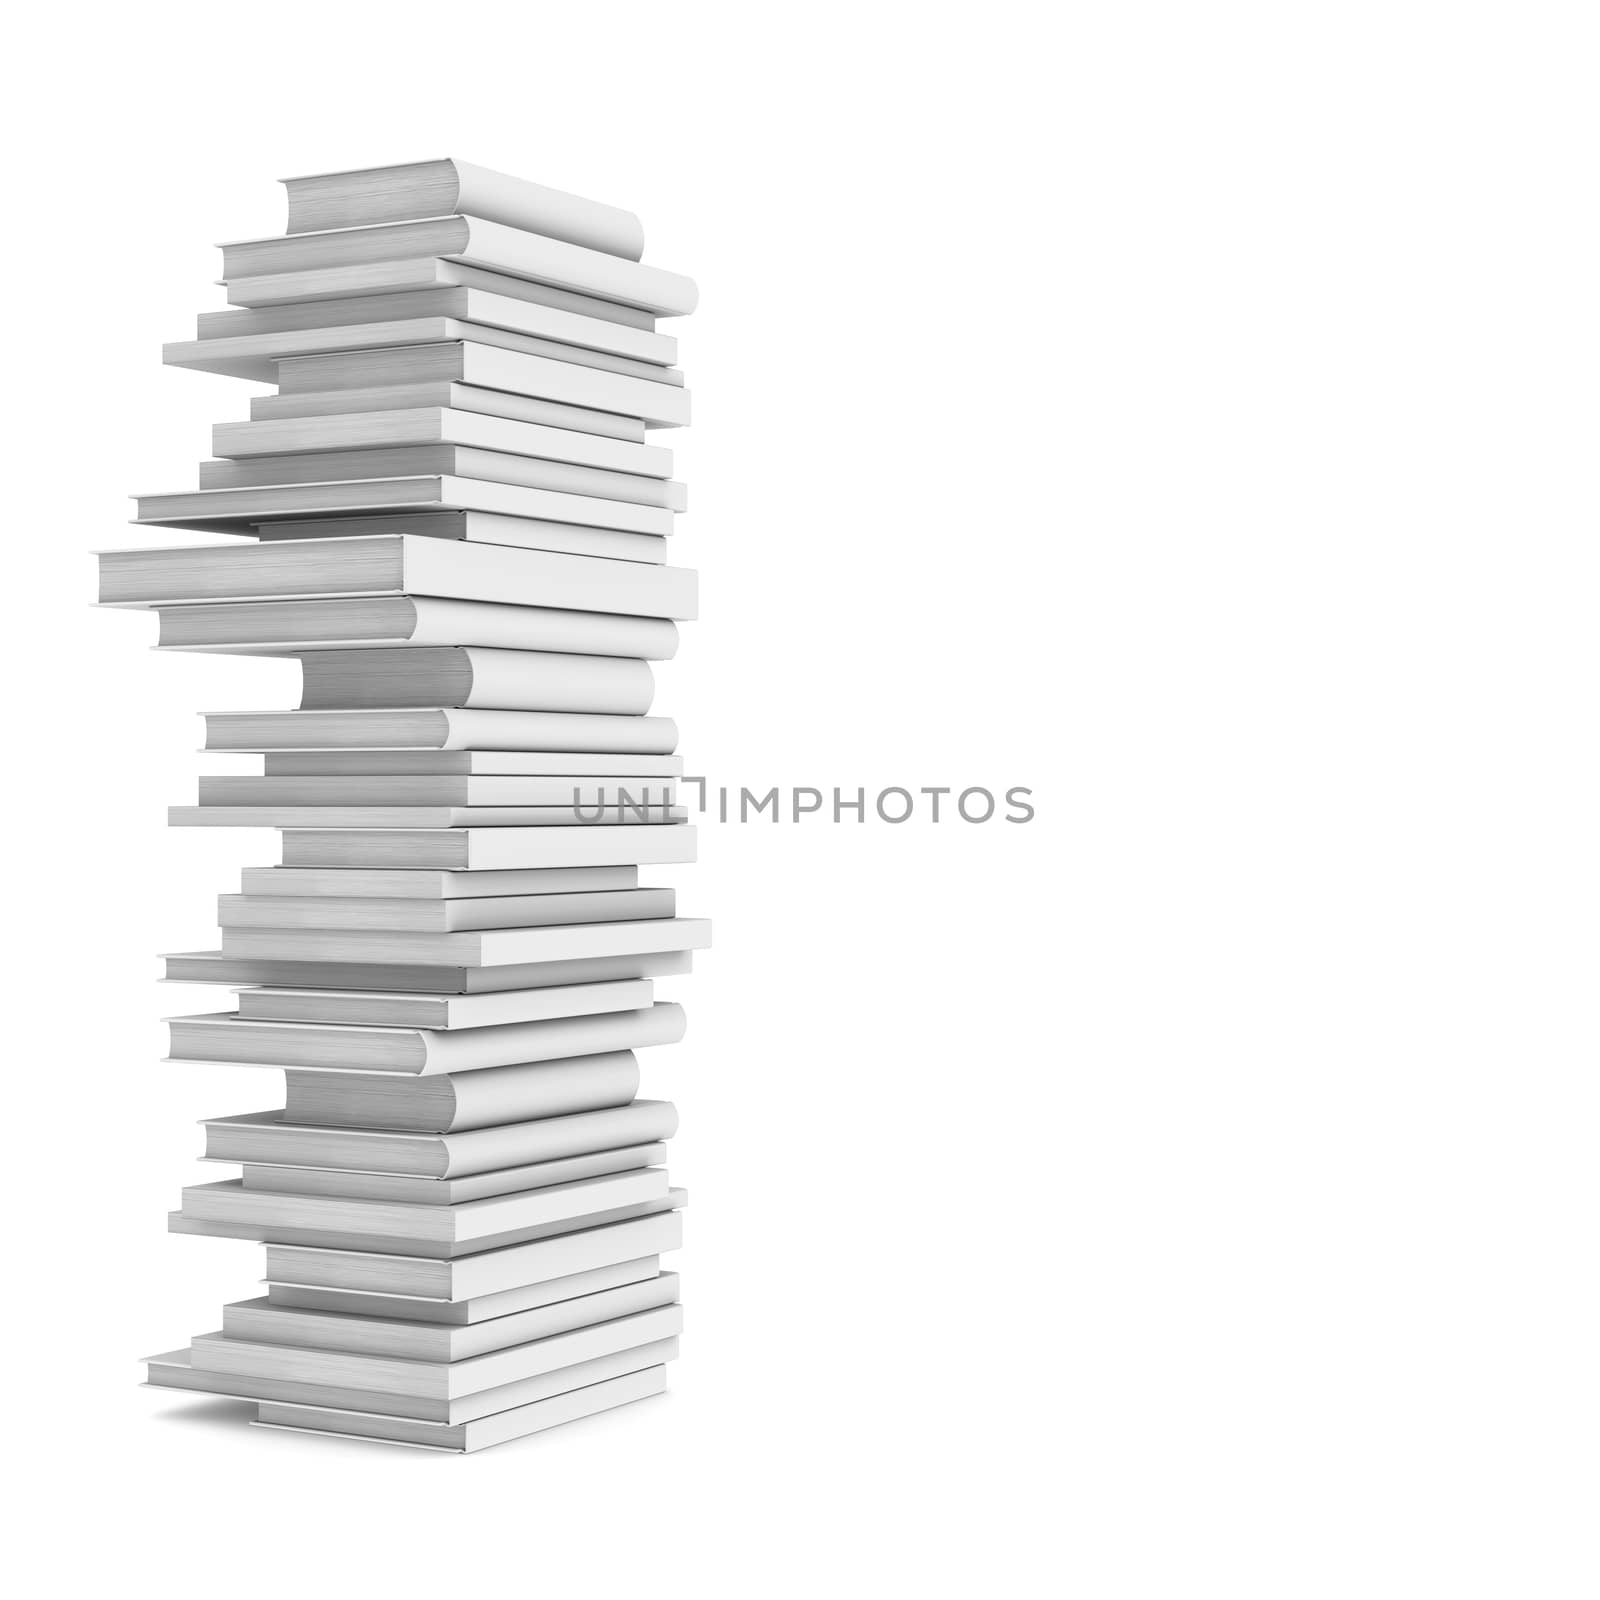 A stack of books by cherezoff